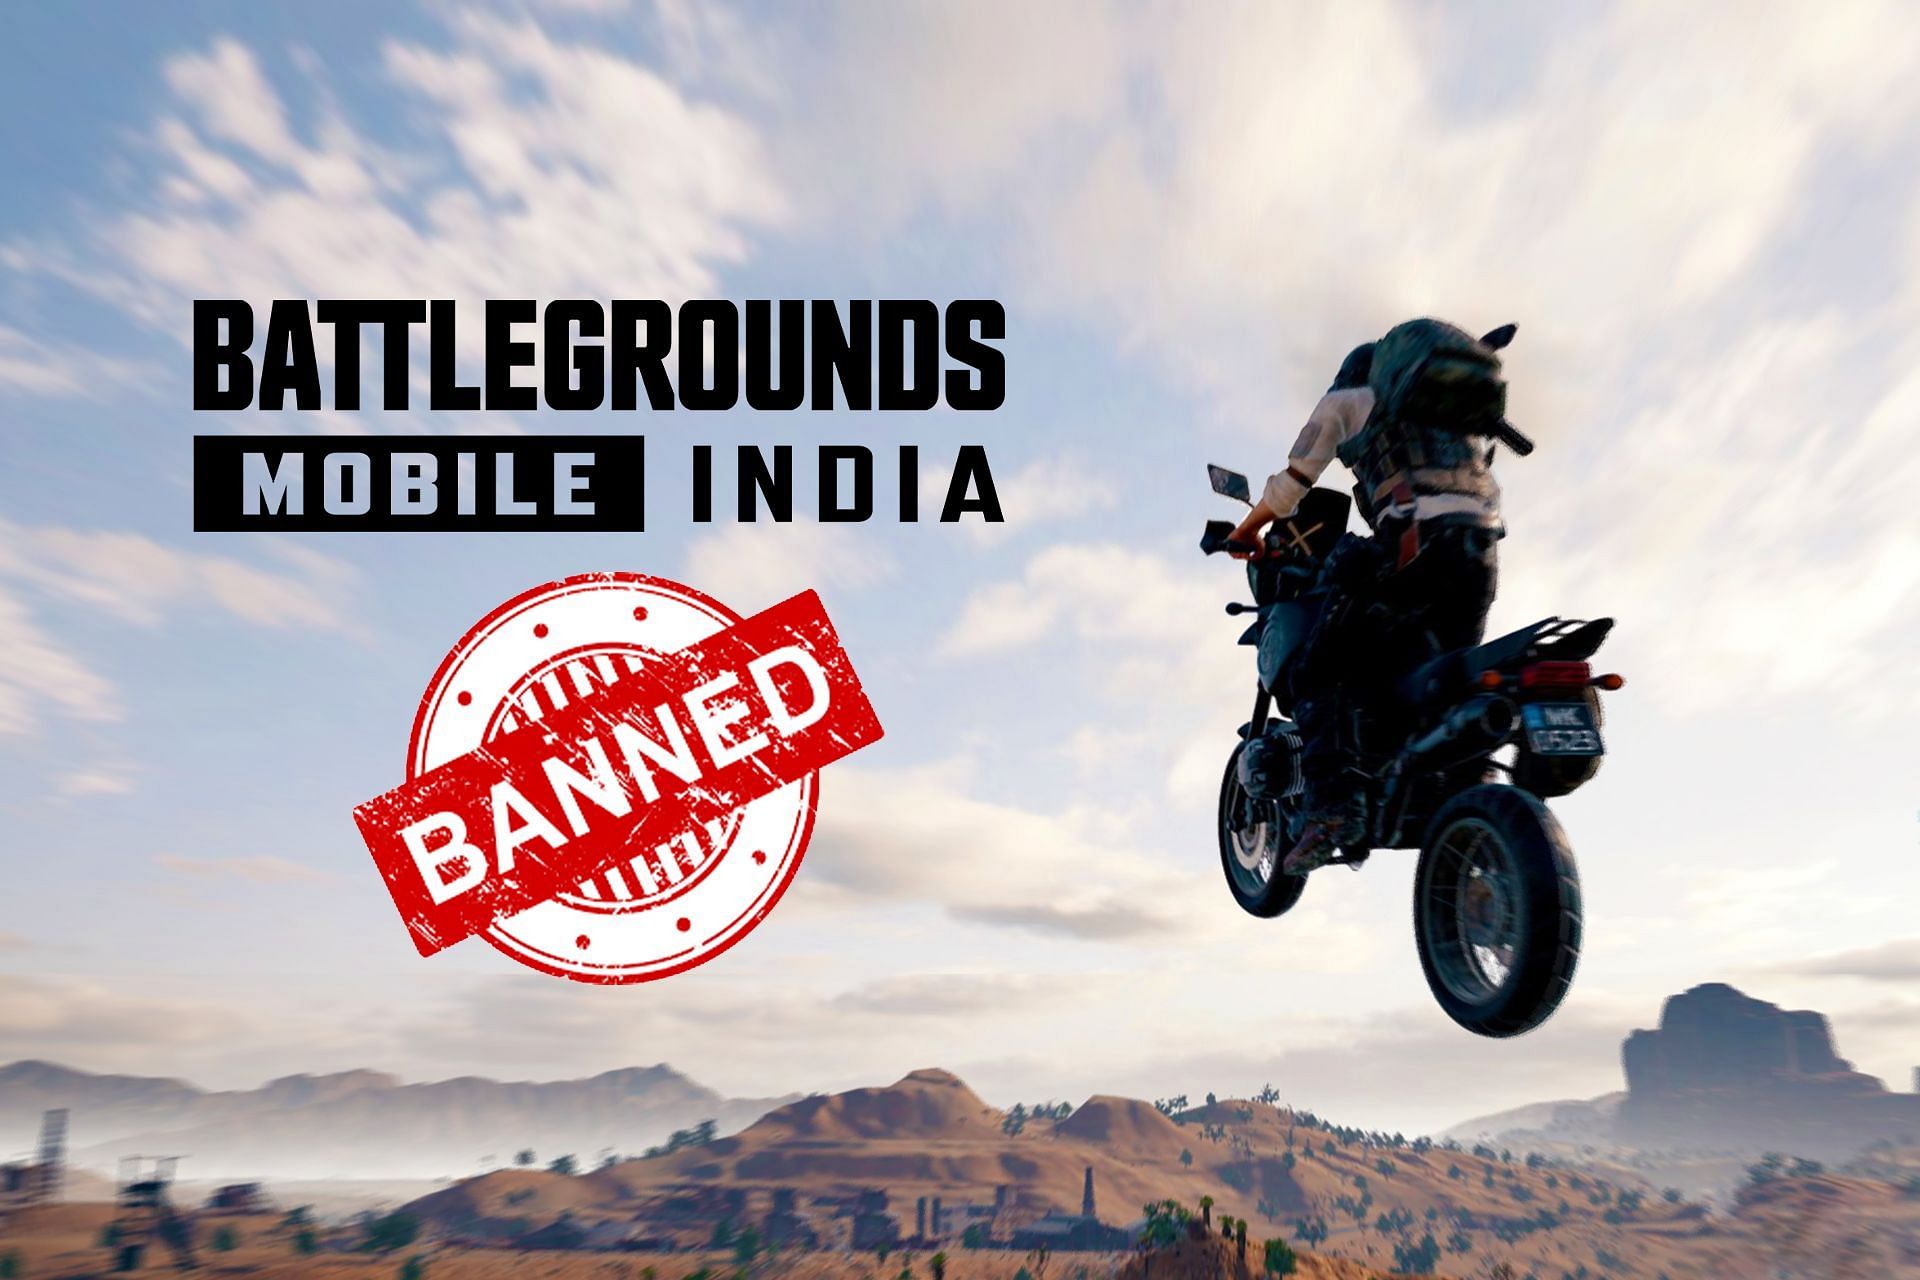 The Government of India&#039;s MeitY banned Battlegrounds Mobile India due to the privacy and security issues (Image via Sportskeeda)